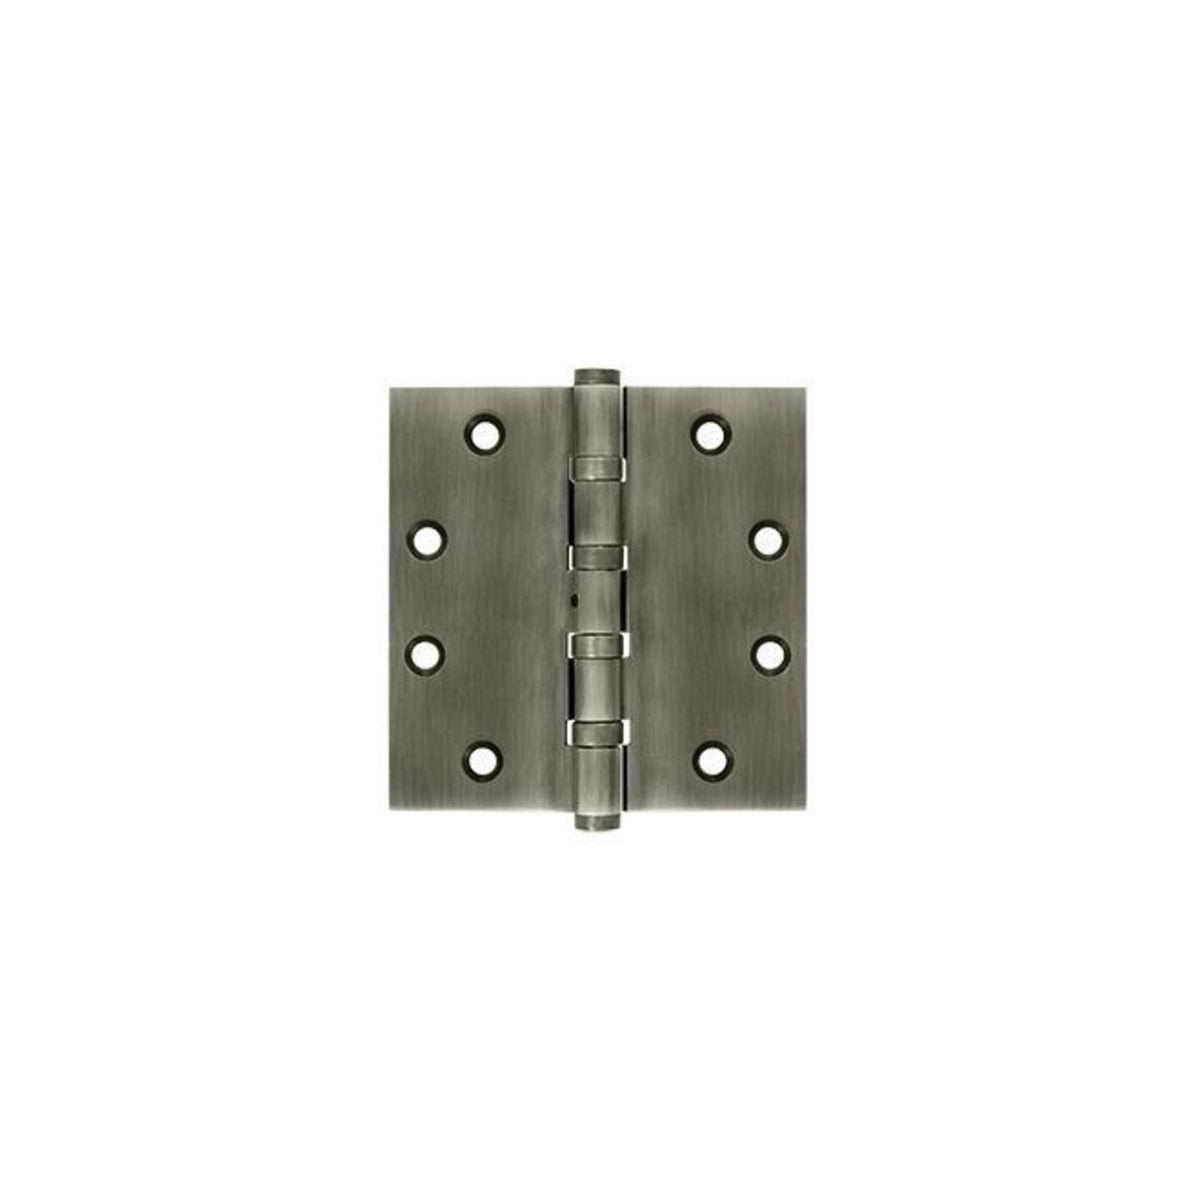 Deltana DSB45NB15A Ball Bearings Square Hinge, Antique Nickel